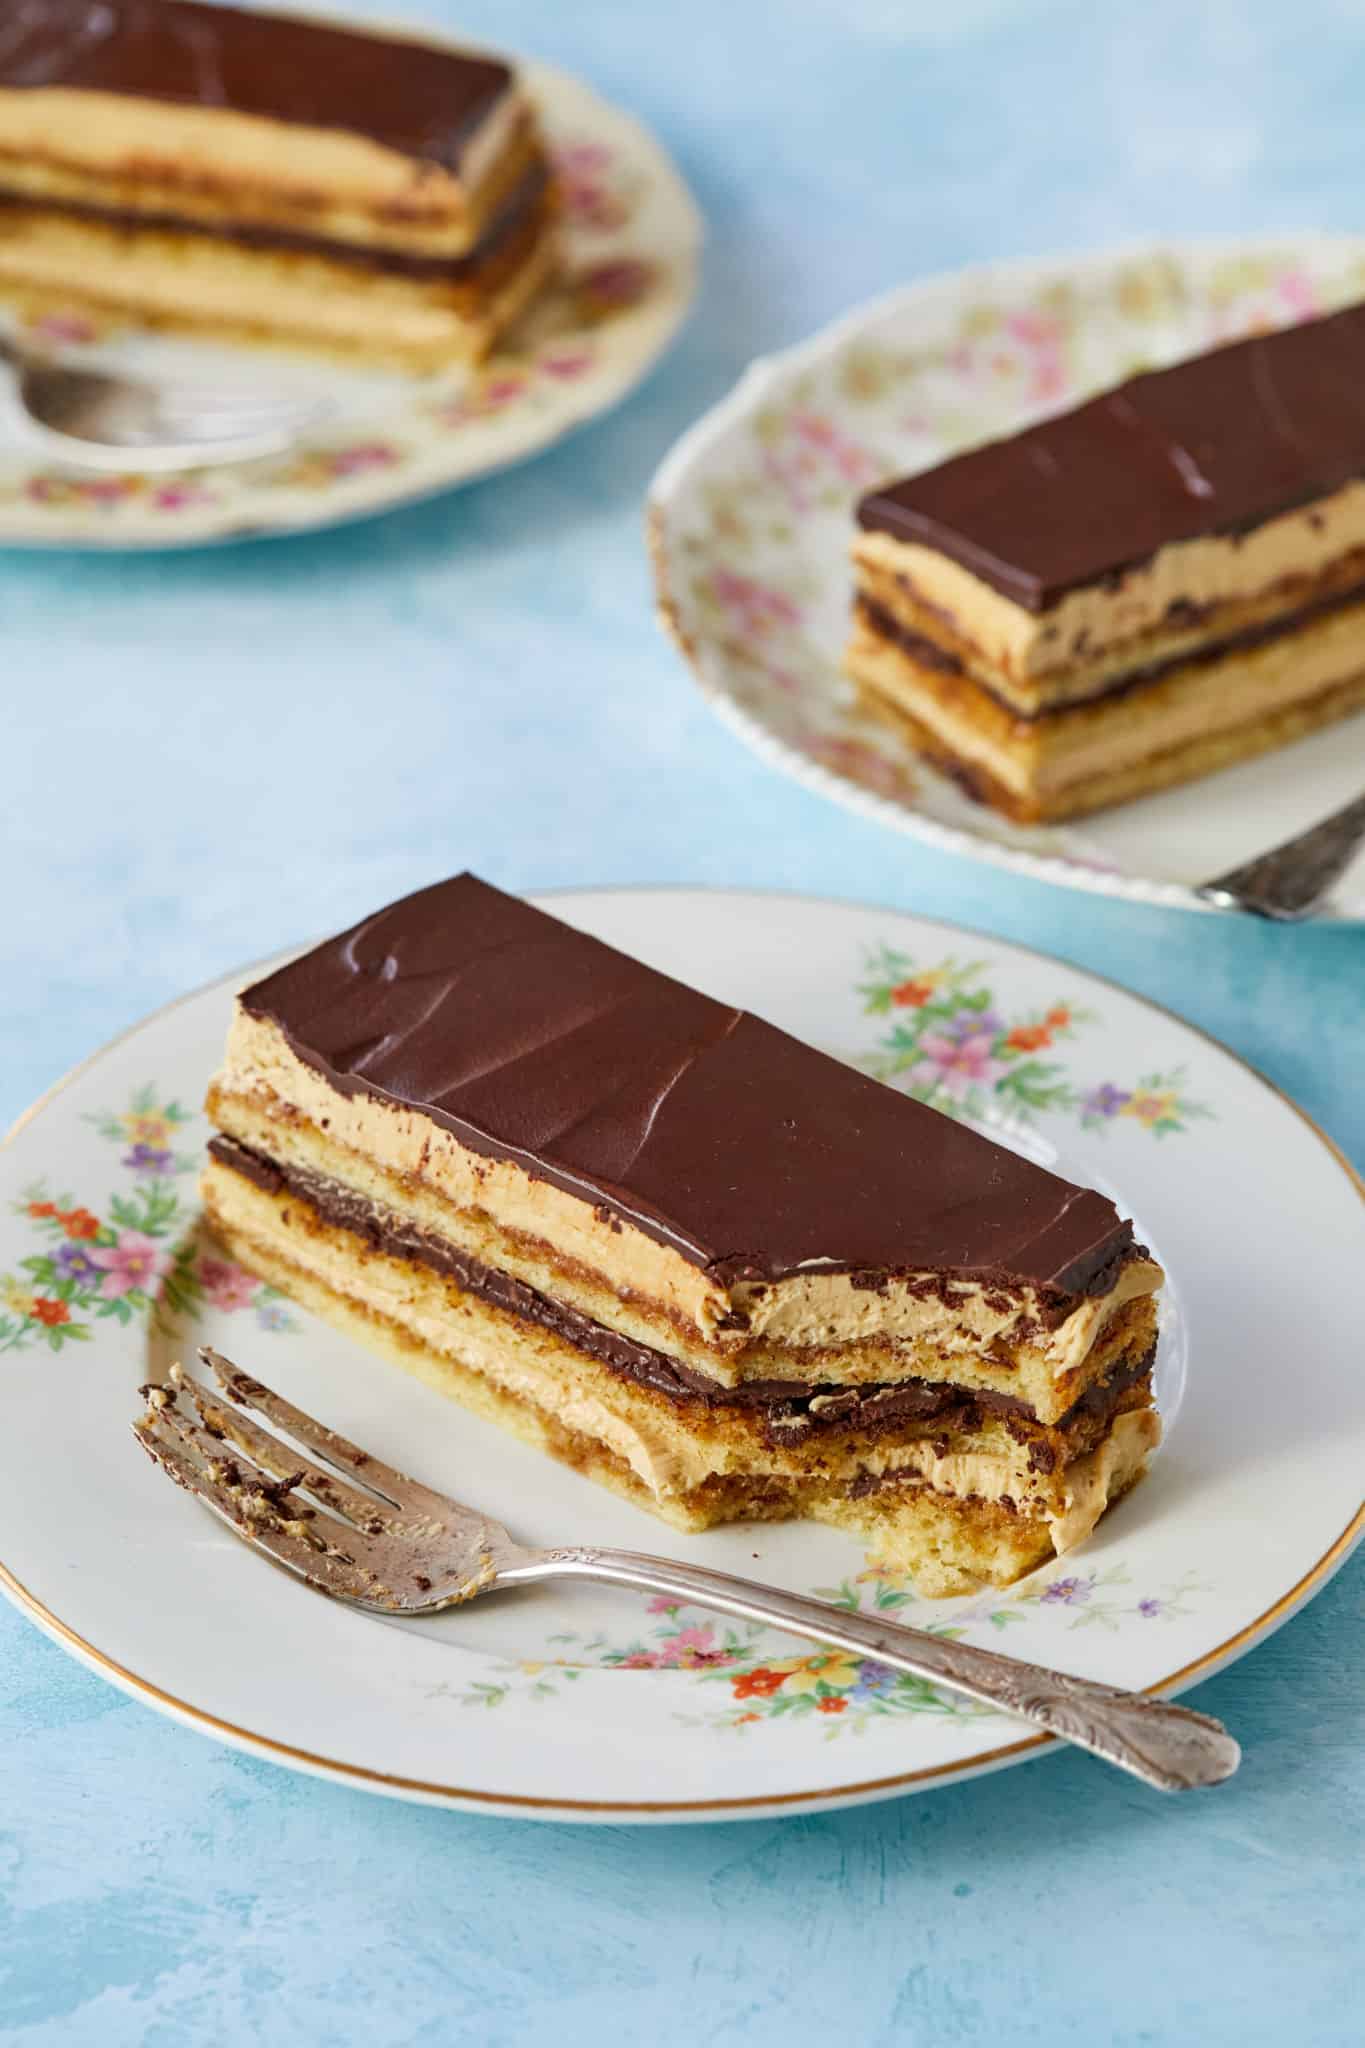 Three slices of This Classic Opera Cake are served, featuring layers of sponge cake, coffee syrup, French coffee buttercream, and chocolate butter glaze.